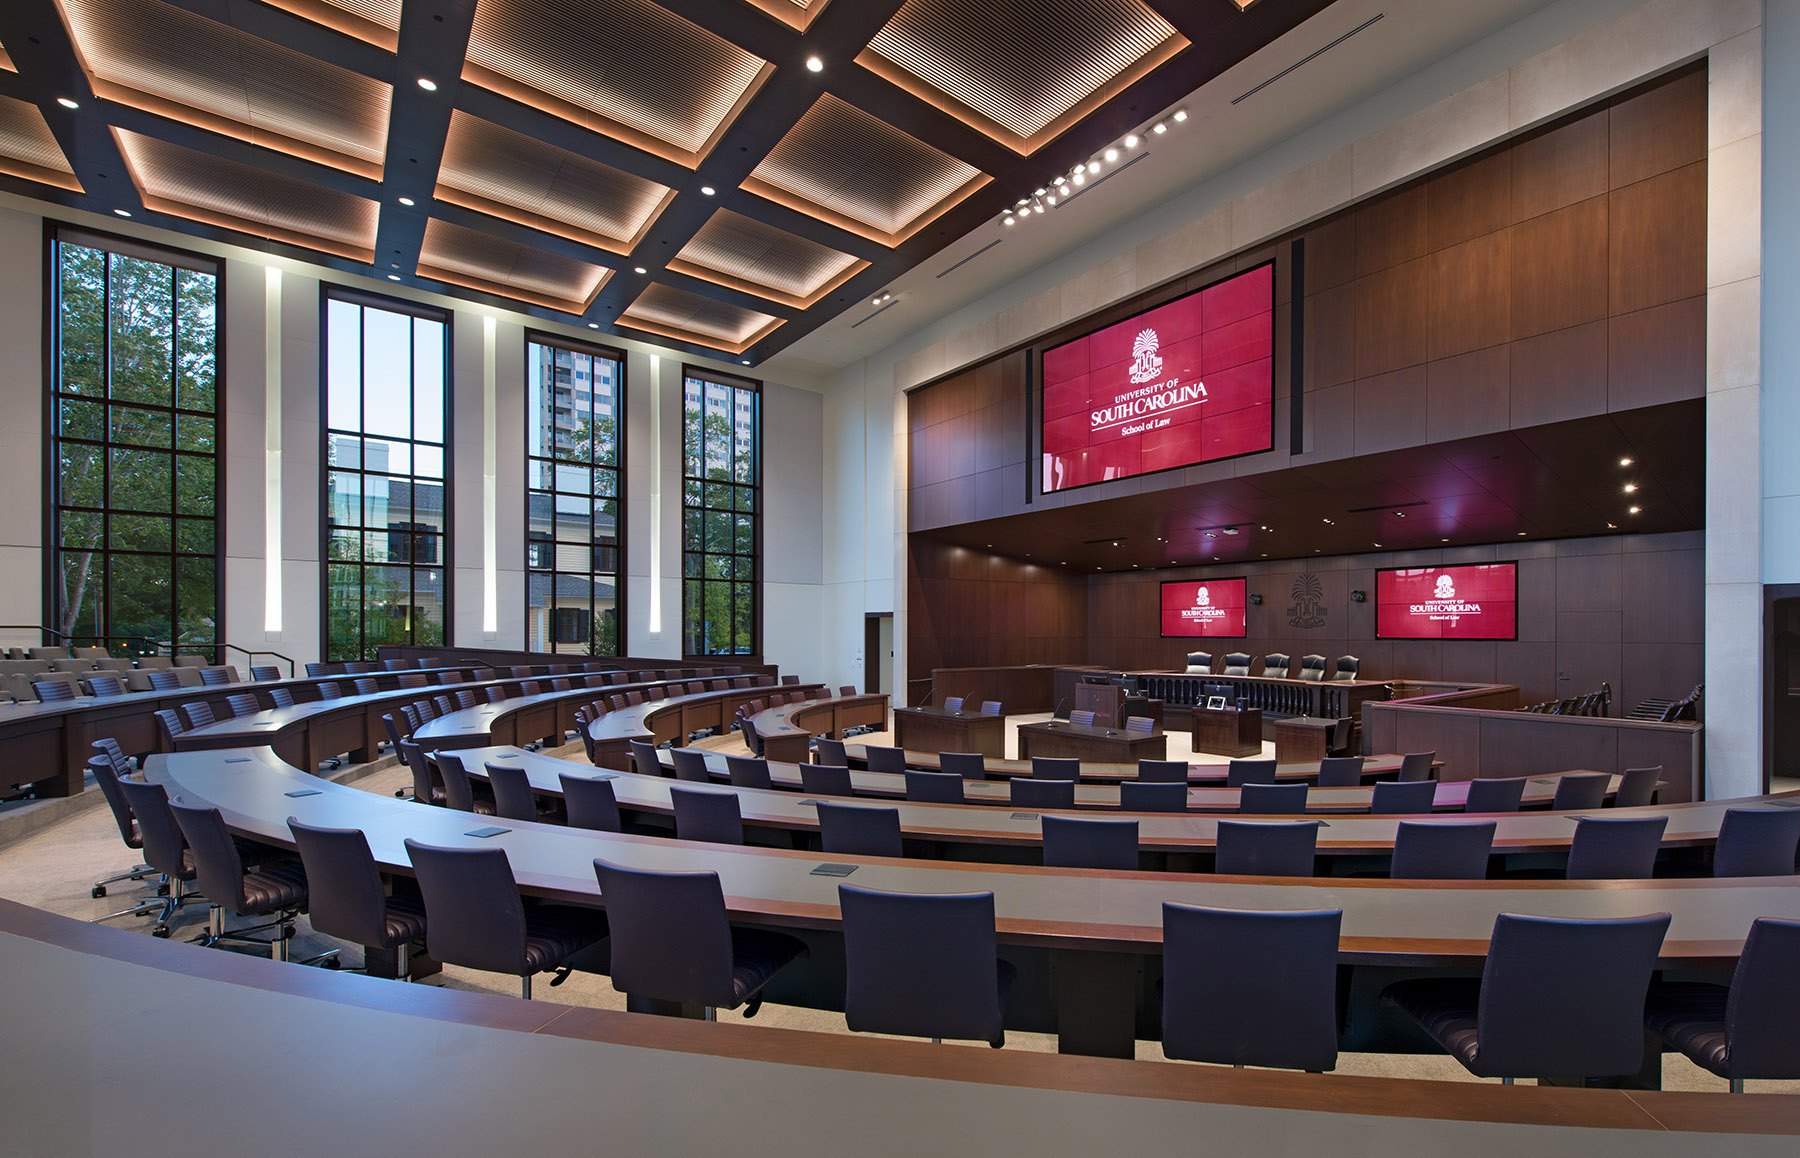 University of South Carolina School of Law Courtroom